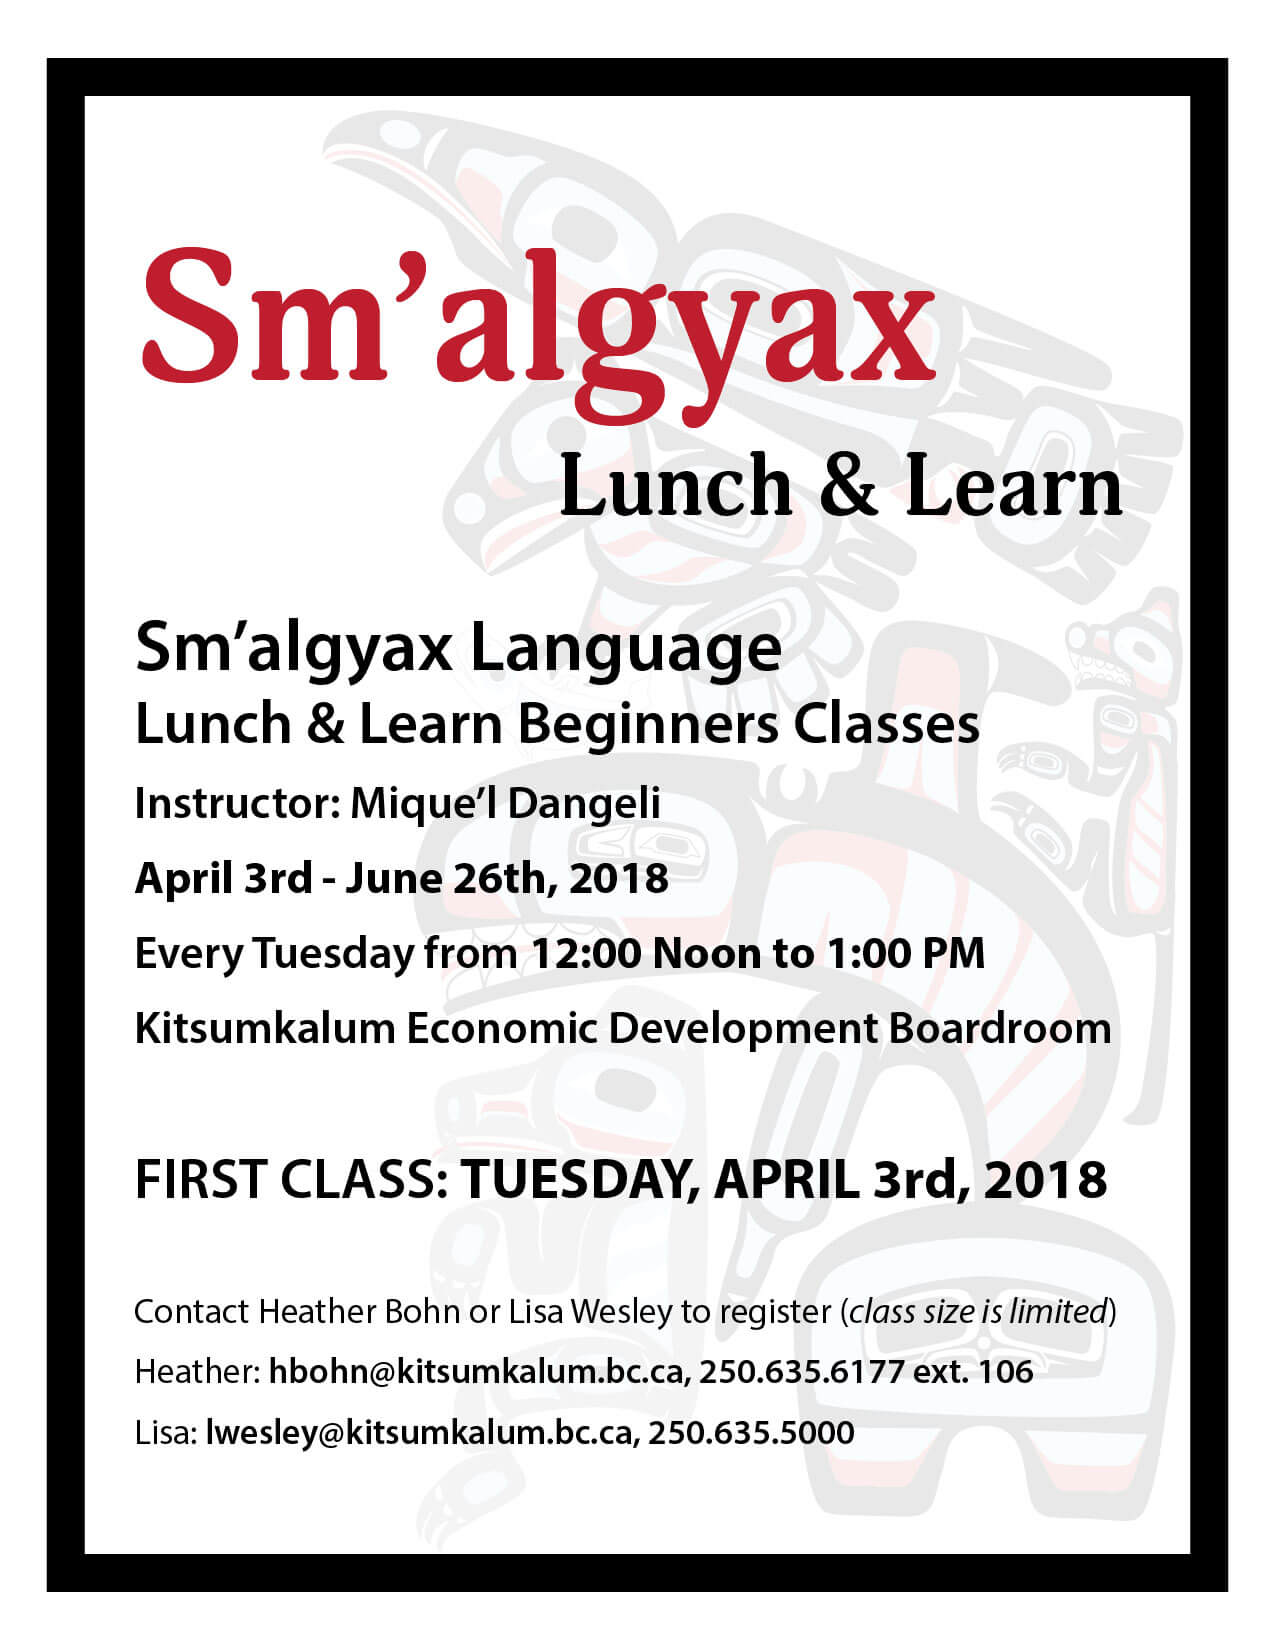 Sm’algyax Lunch and Learn Classes